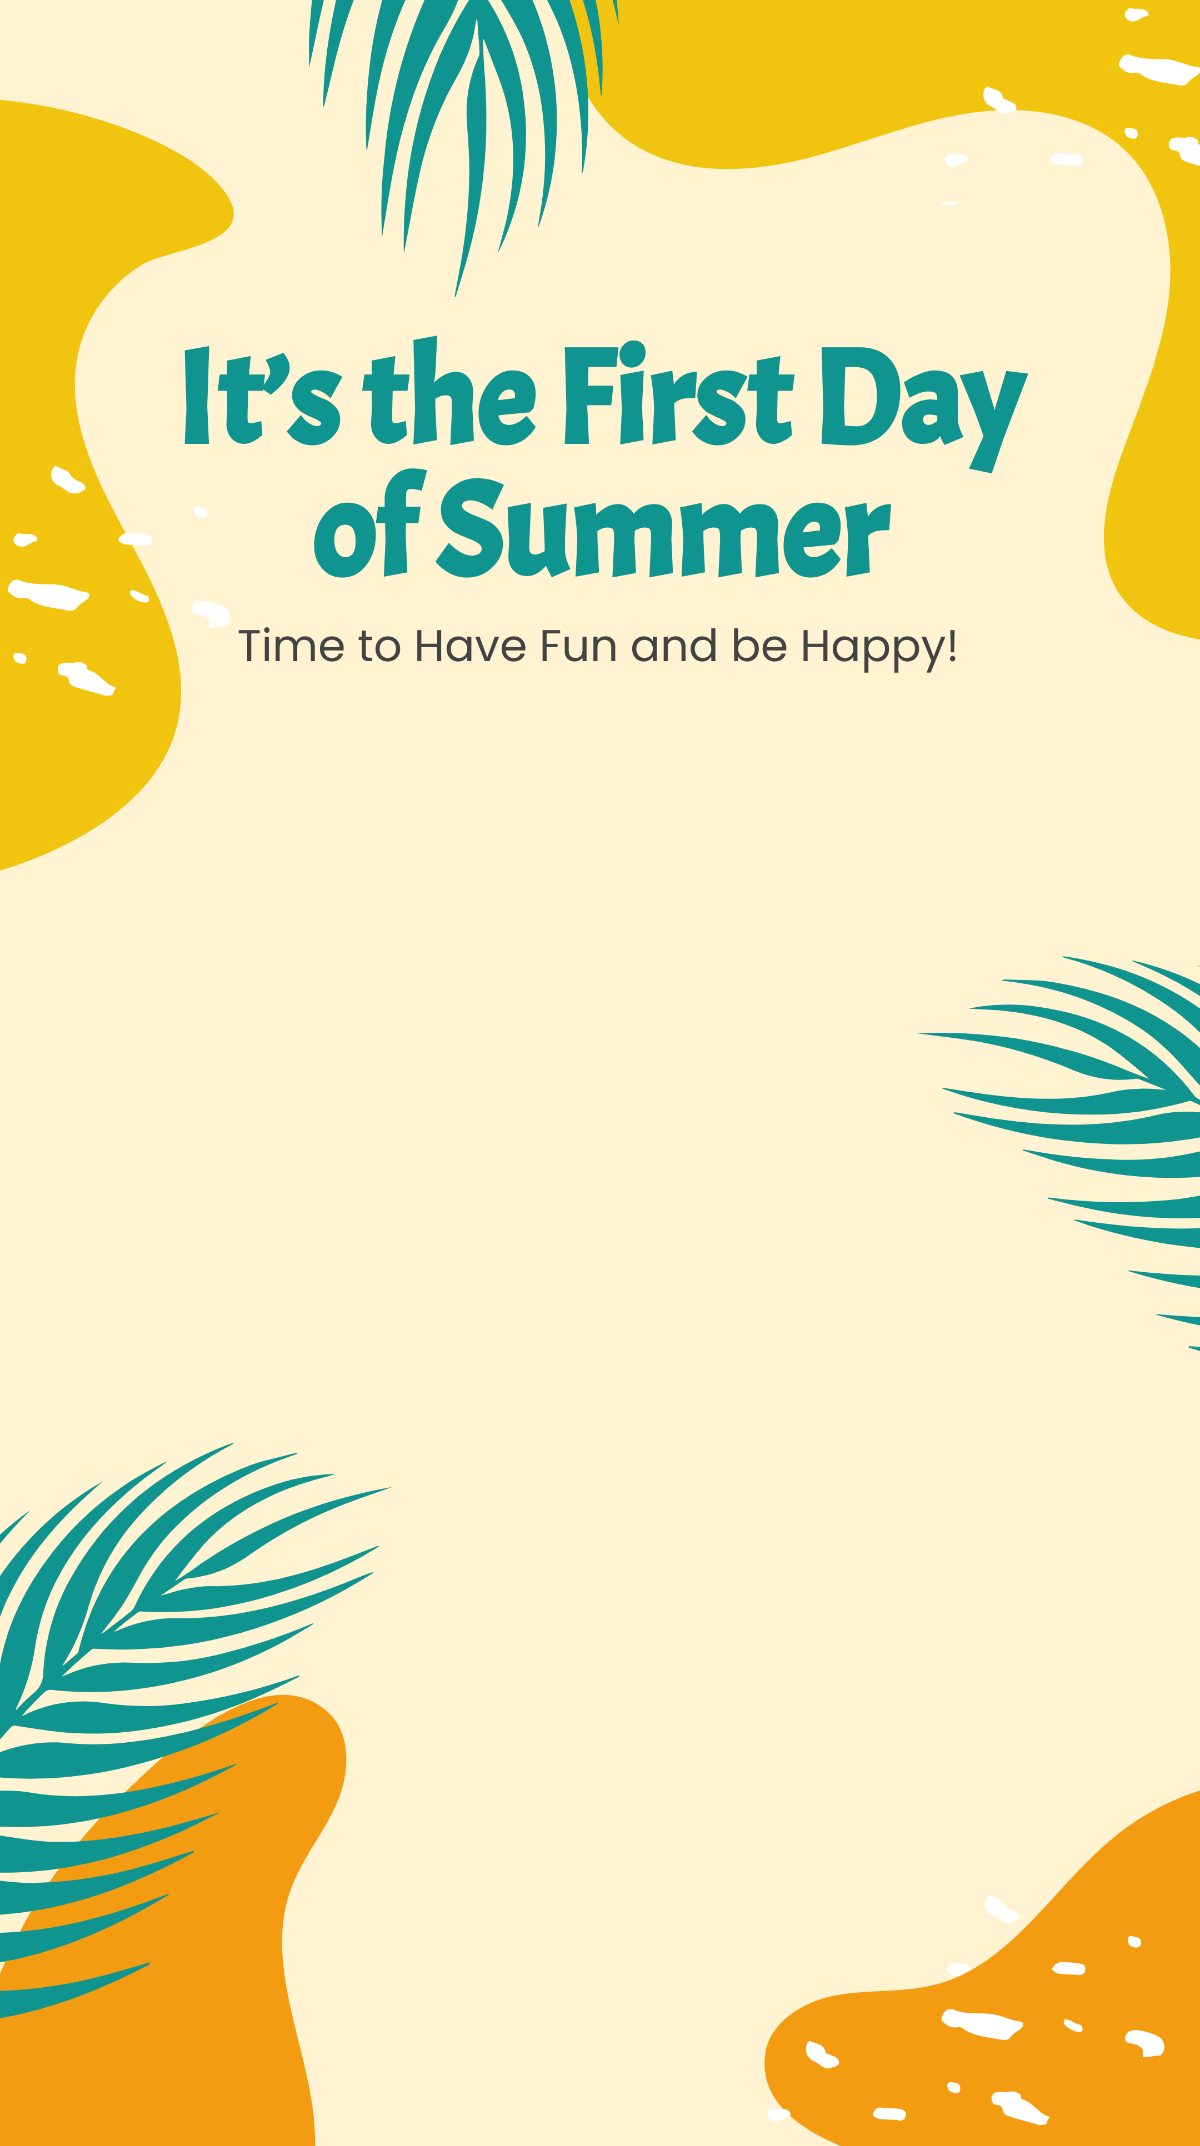 Happy First Day of Summer Snapchat Geofilter